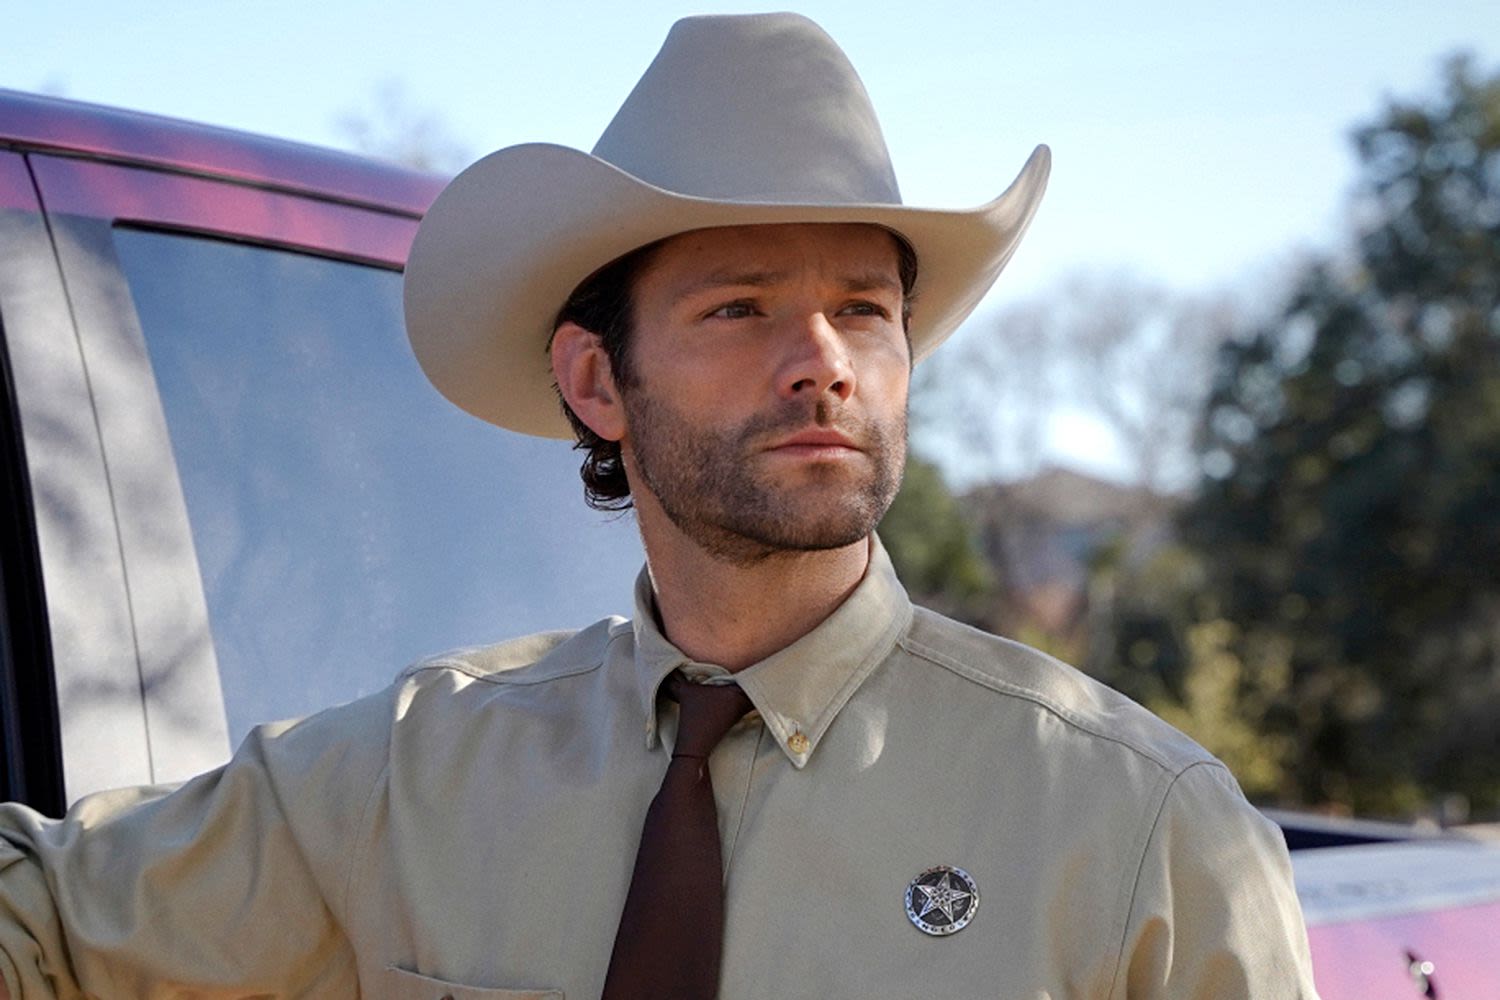 'Walker, Texas Ranger' Reboot with Jared Padalecki Canceled at The CW After 4 Seasons